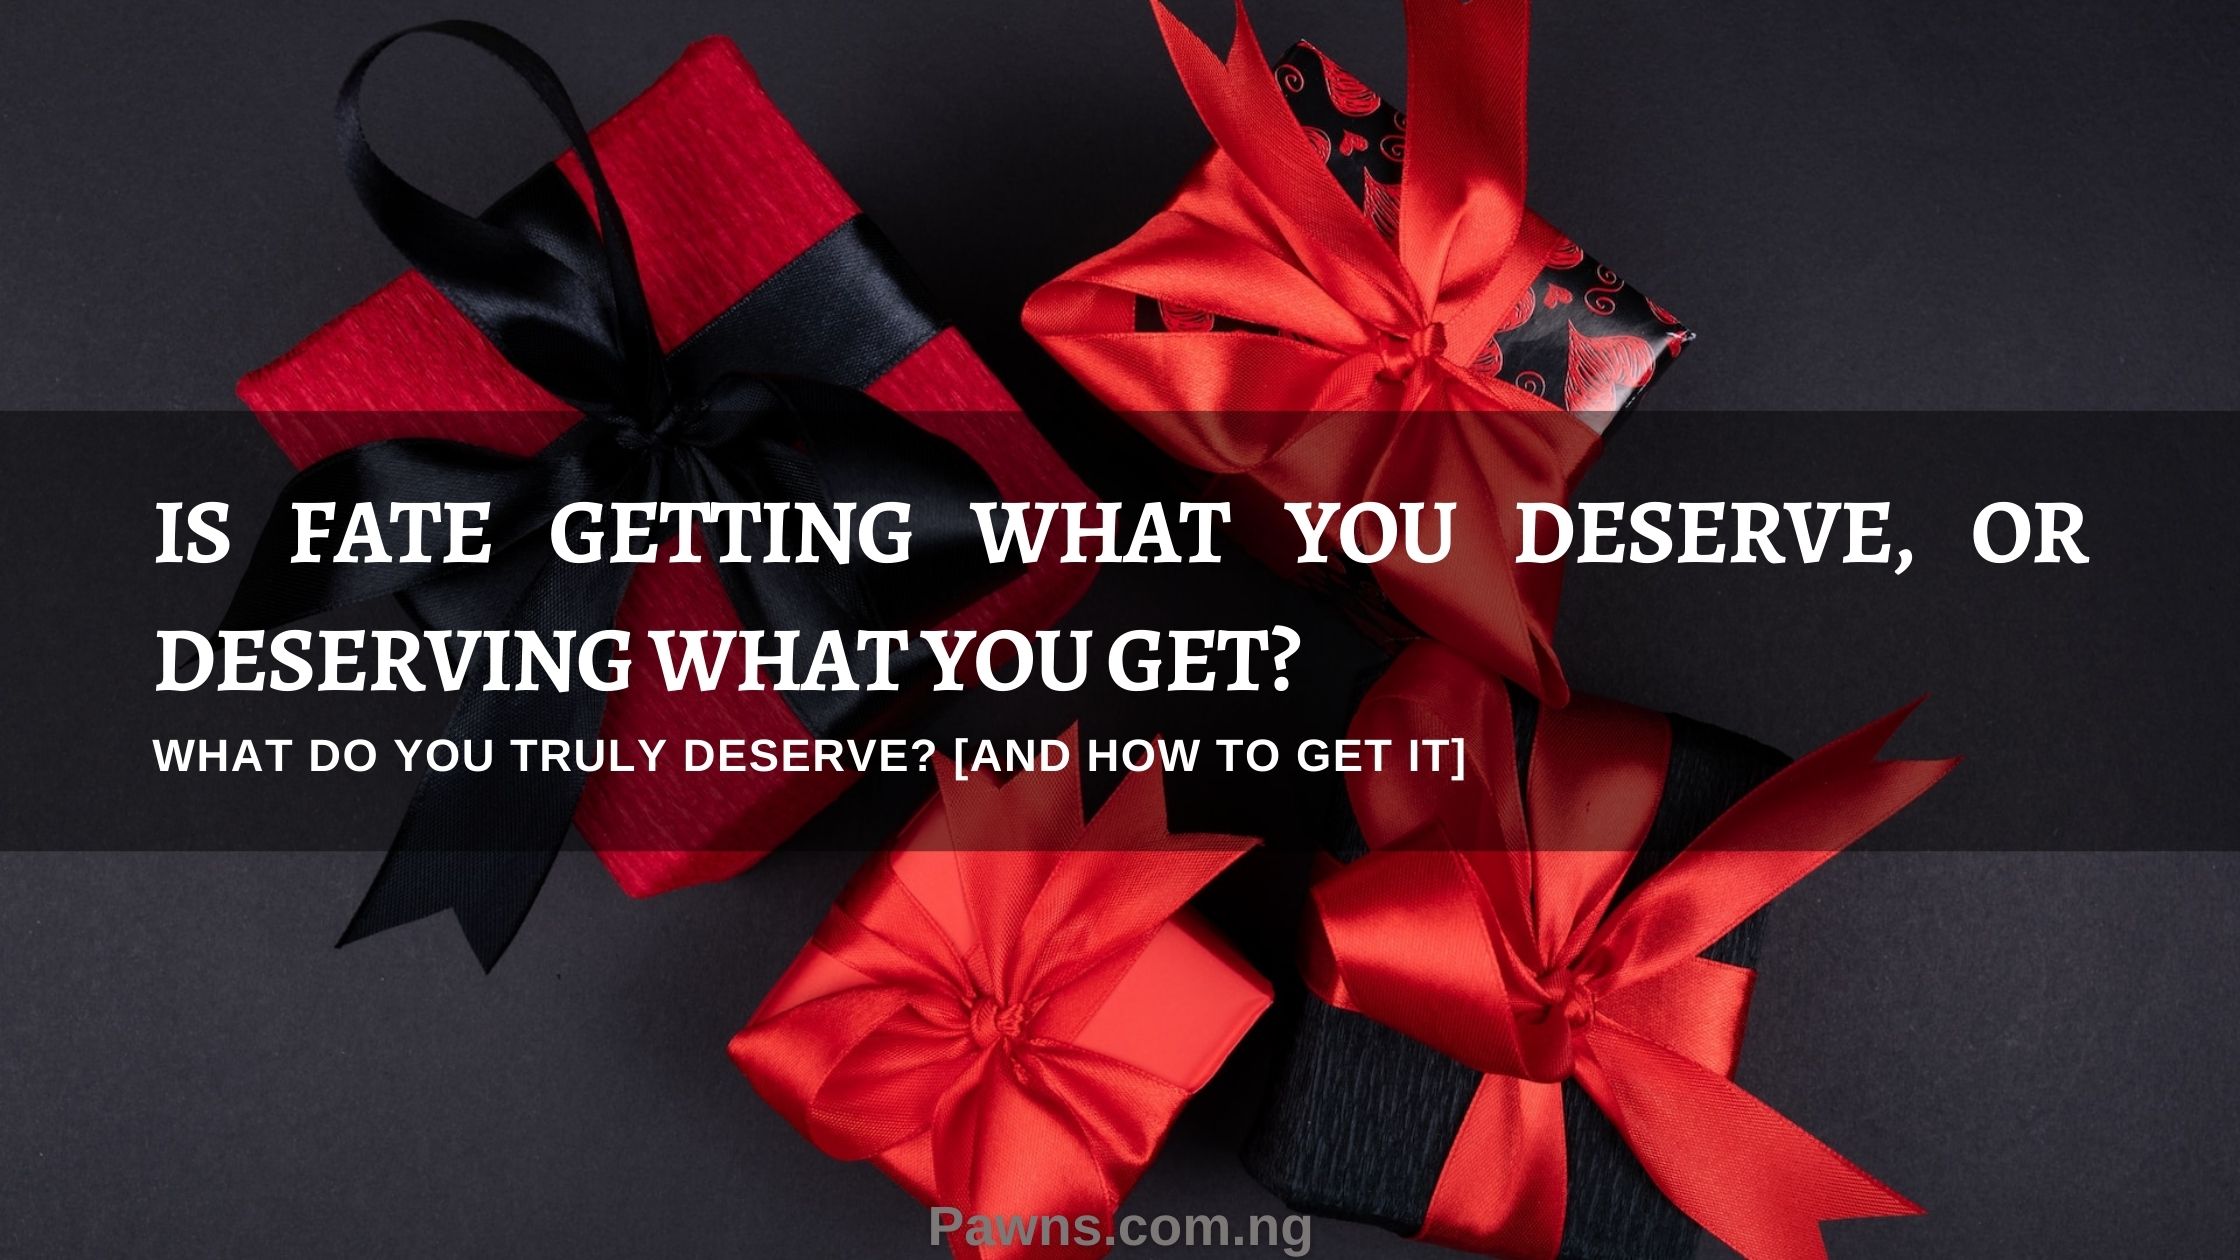 What Do You Truly Deserve [And How To Get It]